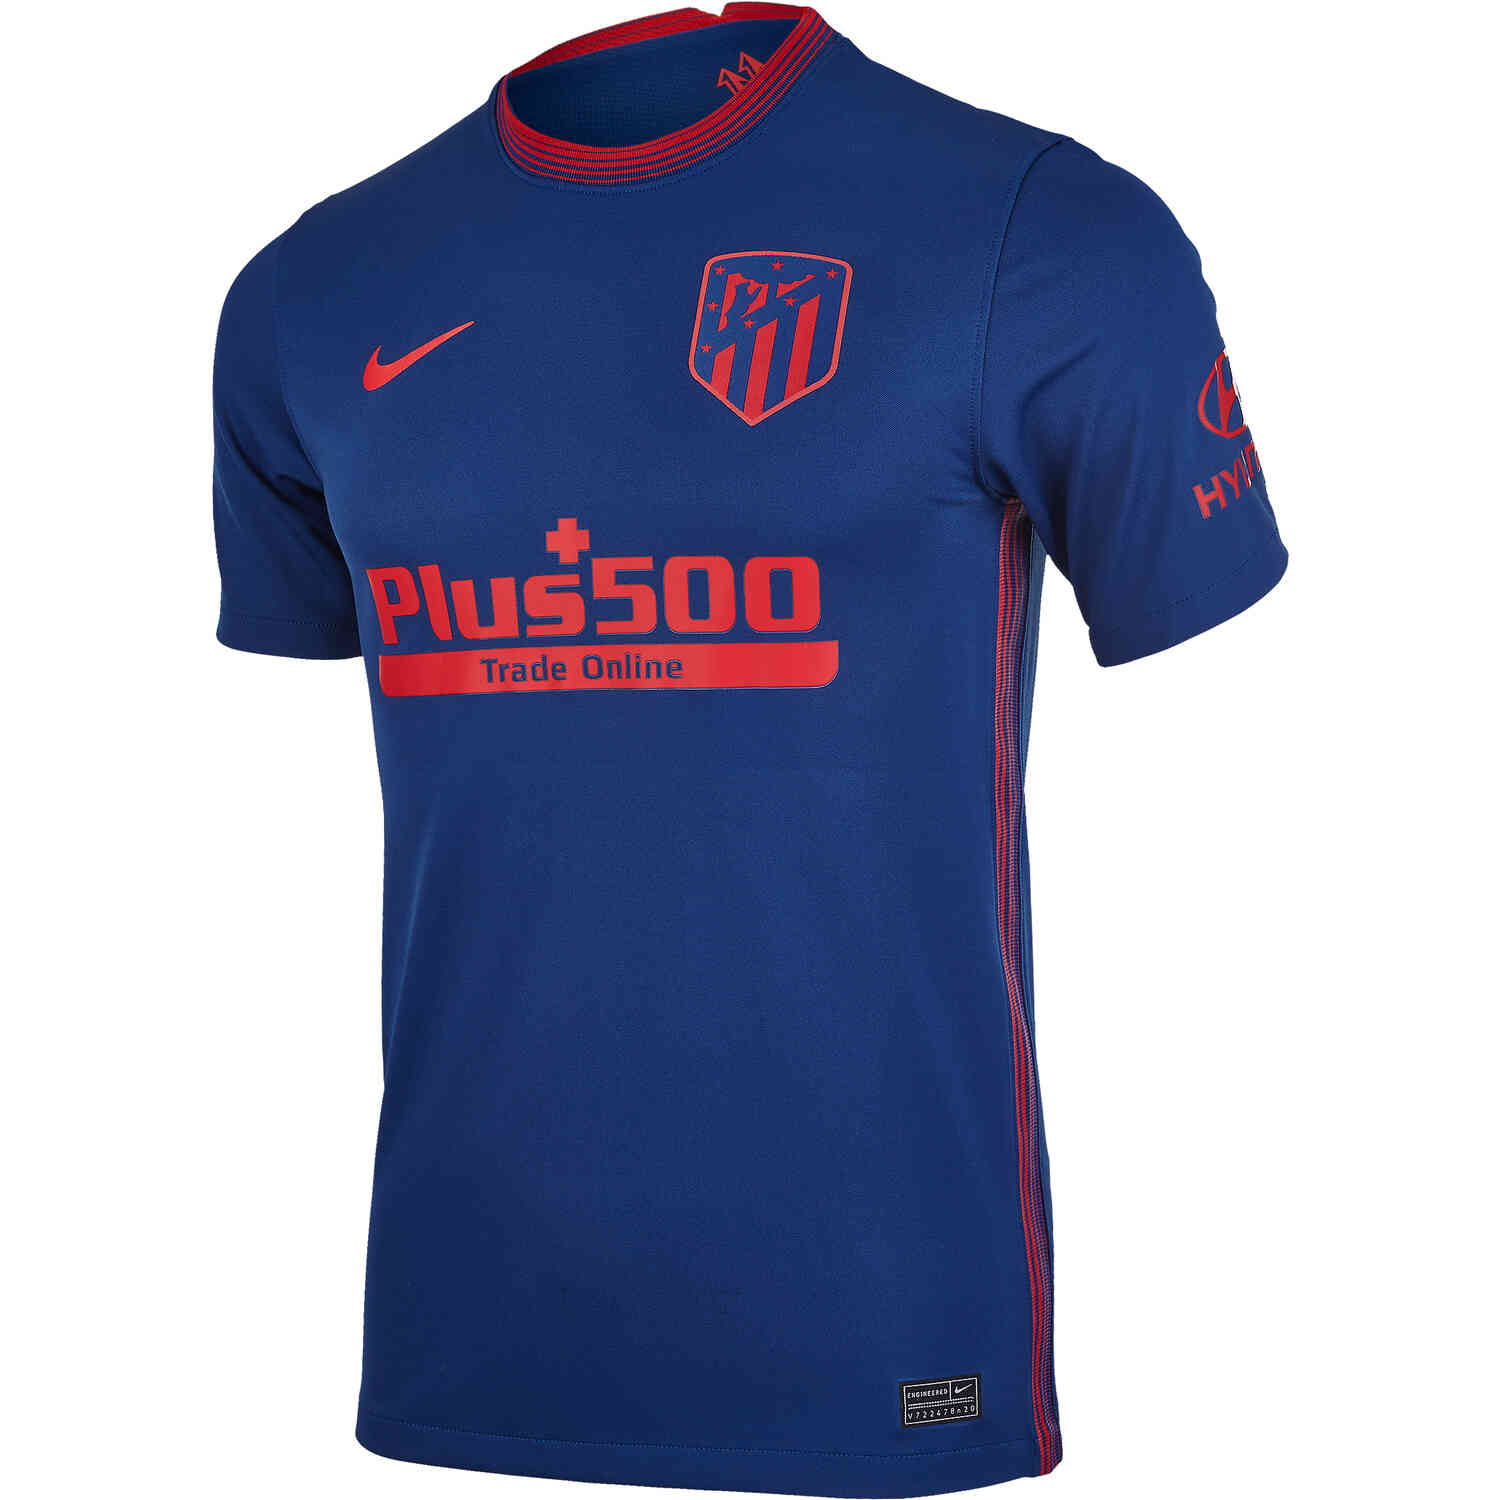 Buy > atletico madrid away jersey > in stock